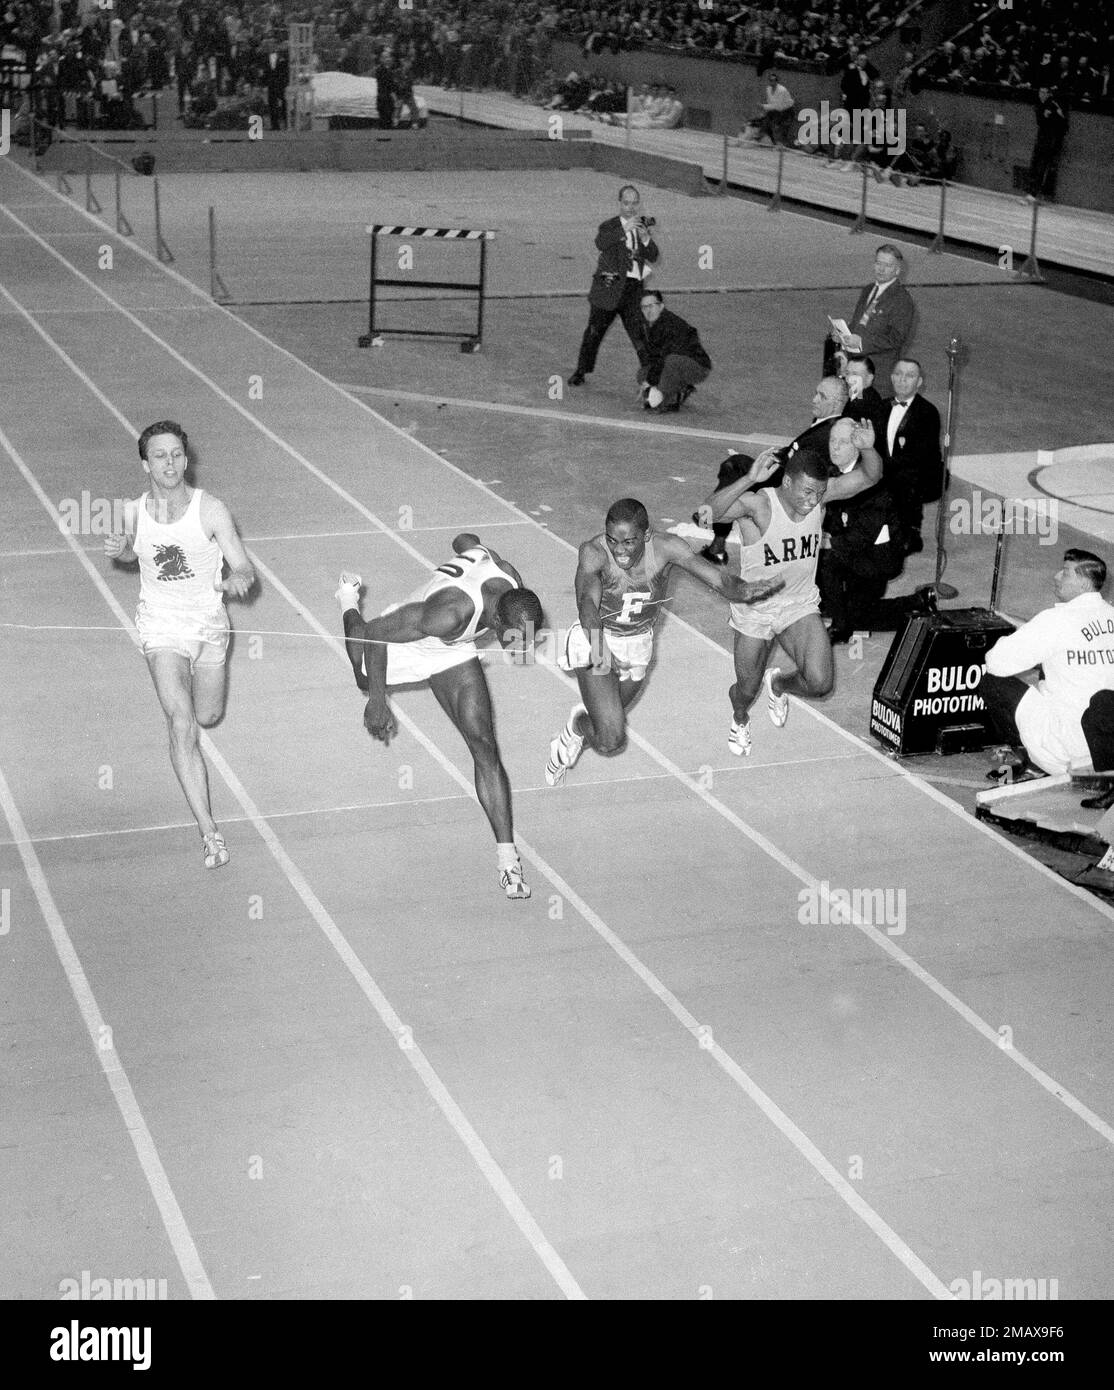 Bob Hayes of Florida A&M, who has equaled the world indoor record for the 60-yard dash, puts his nose to the tape to barely escape an upset in the 60-yard dash at the Millrose Games at Madison Square Garden in New York, Jan. 30, 1964. Hayes' time was 6.1 seconds, equal to the Millrose games record. Sam Perry of Fordham, second from right, led Hayes at the starting blocks, but was nipped at the wire. At left is Gerald Ashworth of Boston A.A. and right is Mel Pender of the U.S. Army. (AP Photo) Stock Photo